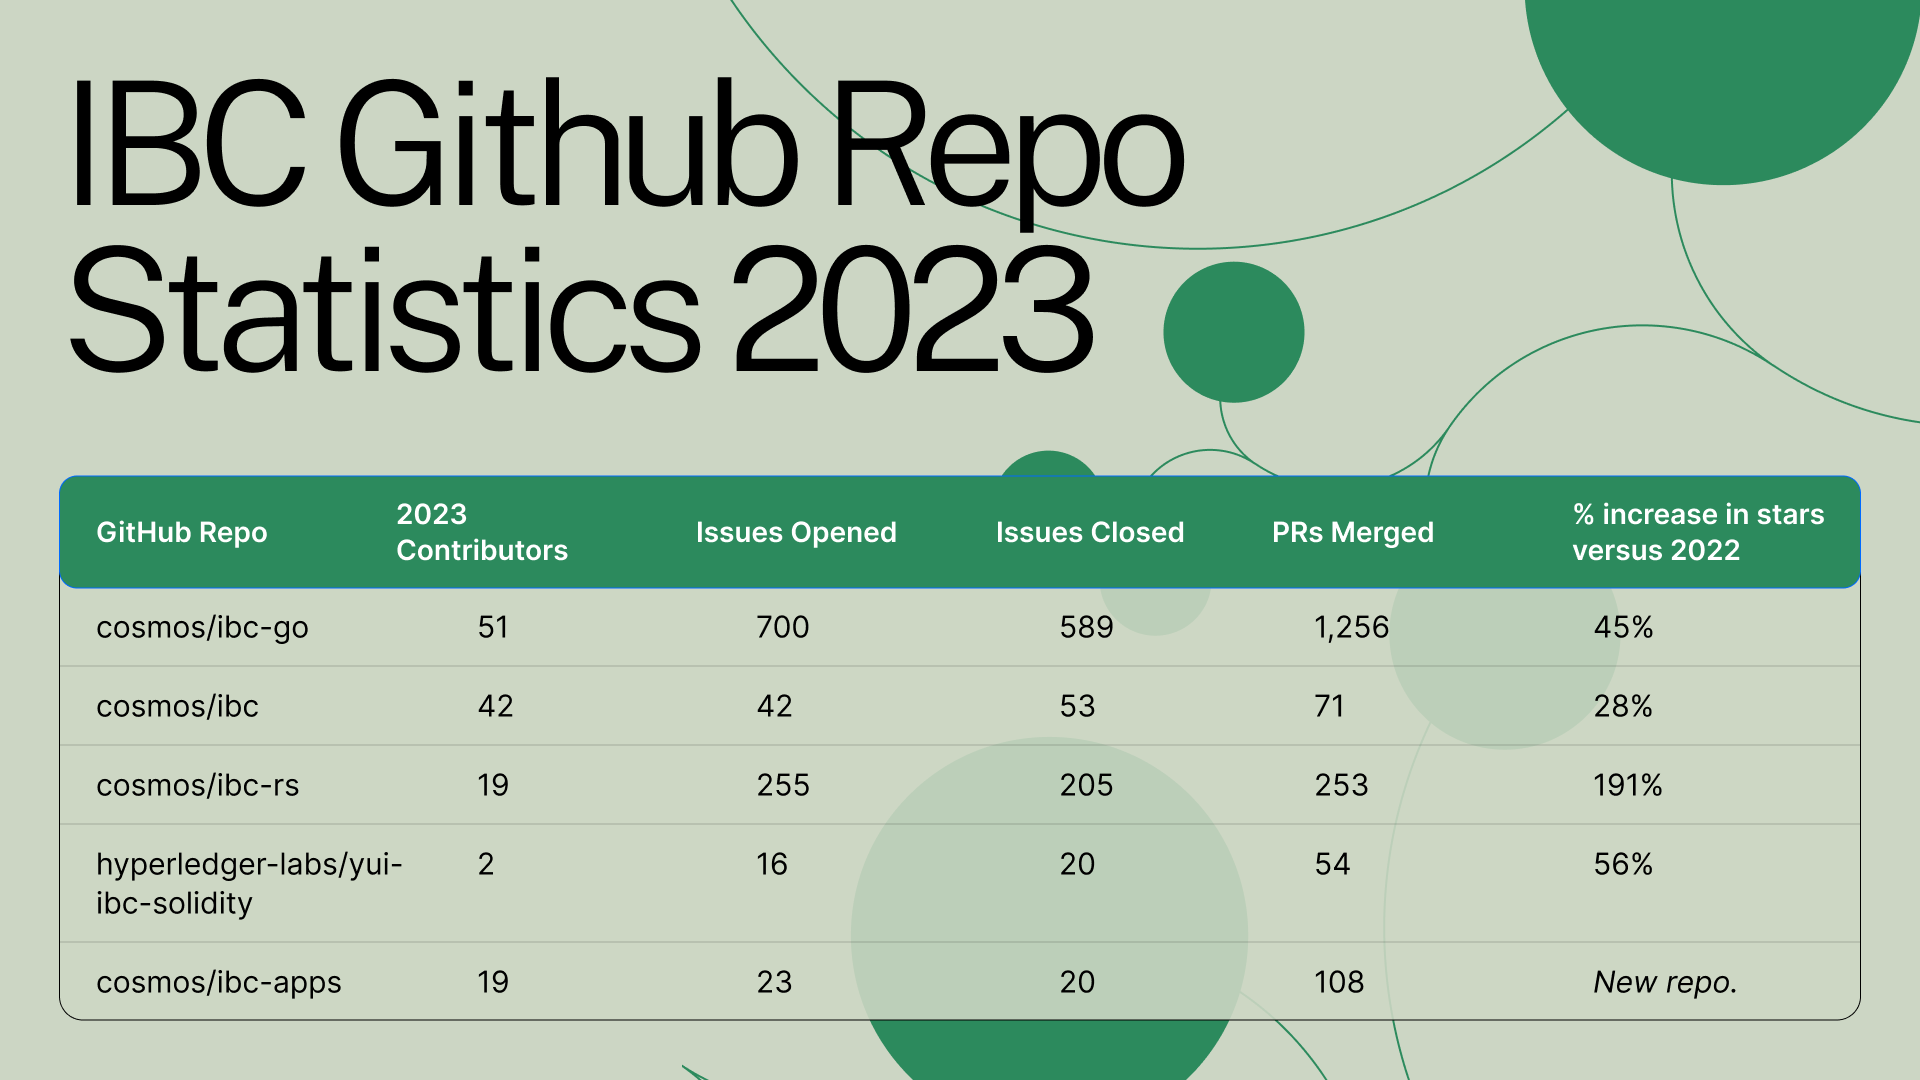 This image shows the IBC Github repo statistics for 2023.